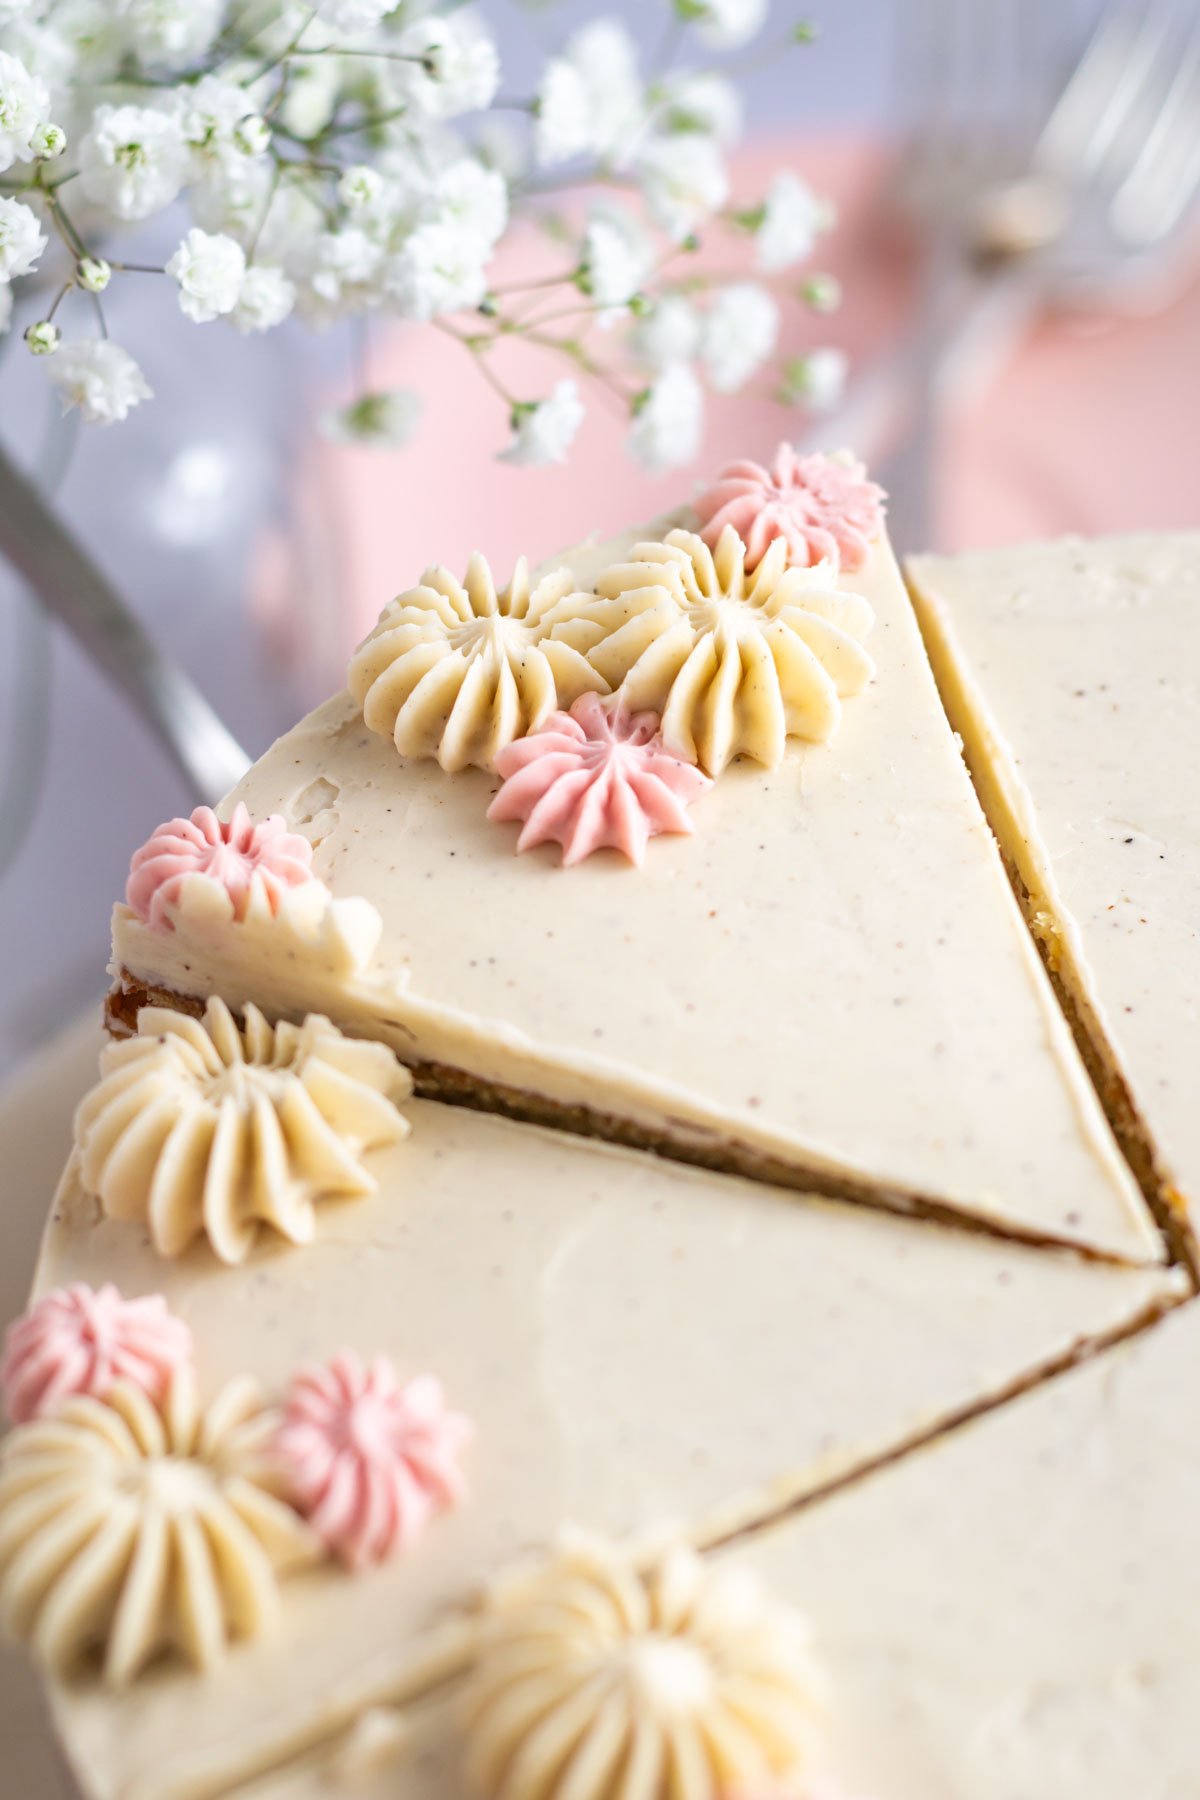 cut slices of decorated cake